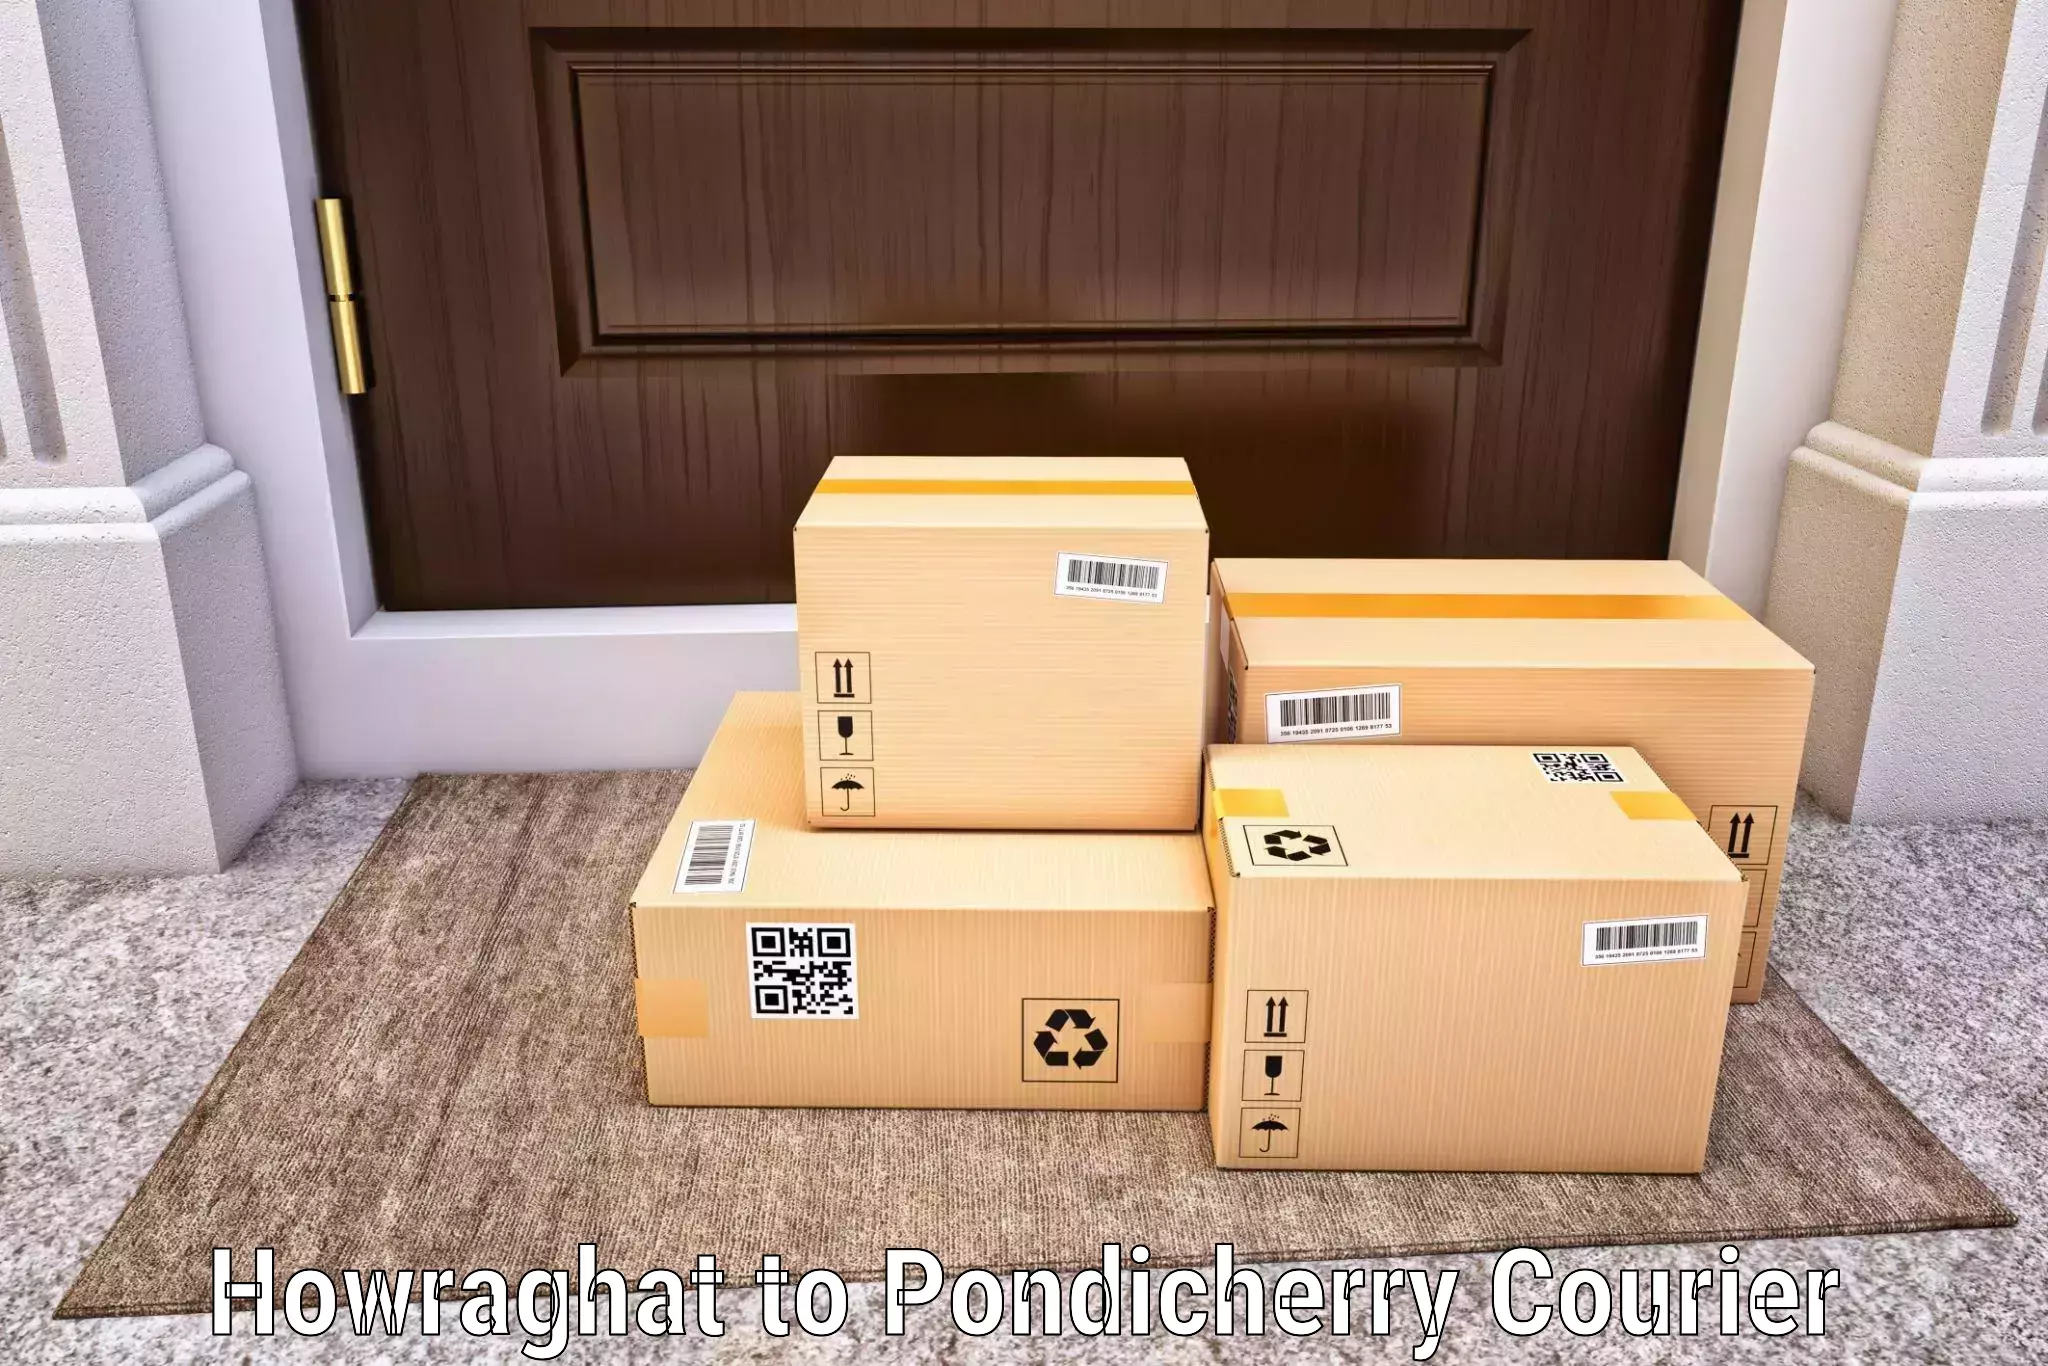 Large package courier Howraghat to Pondicherry University